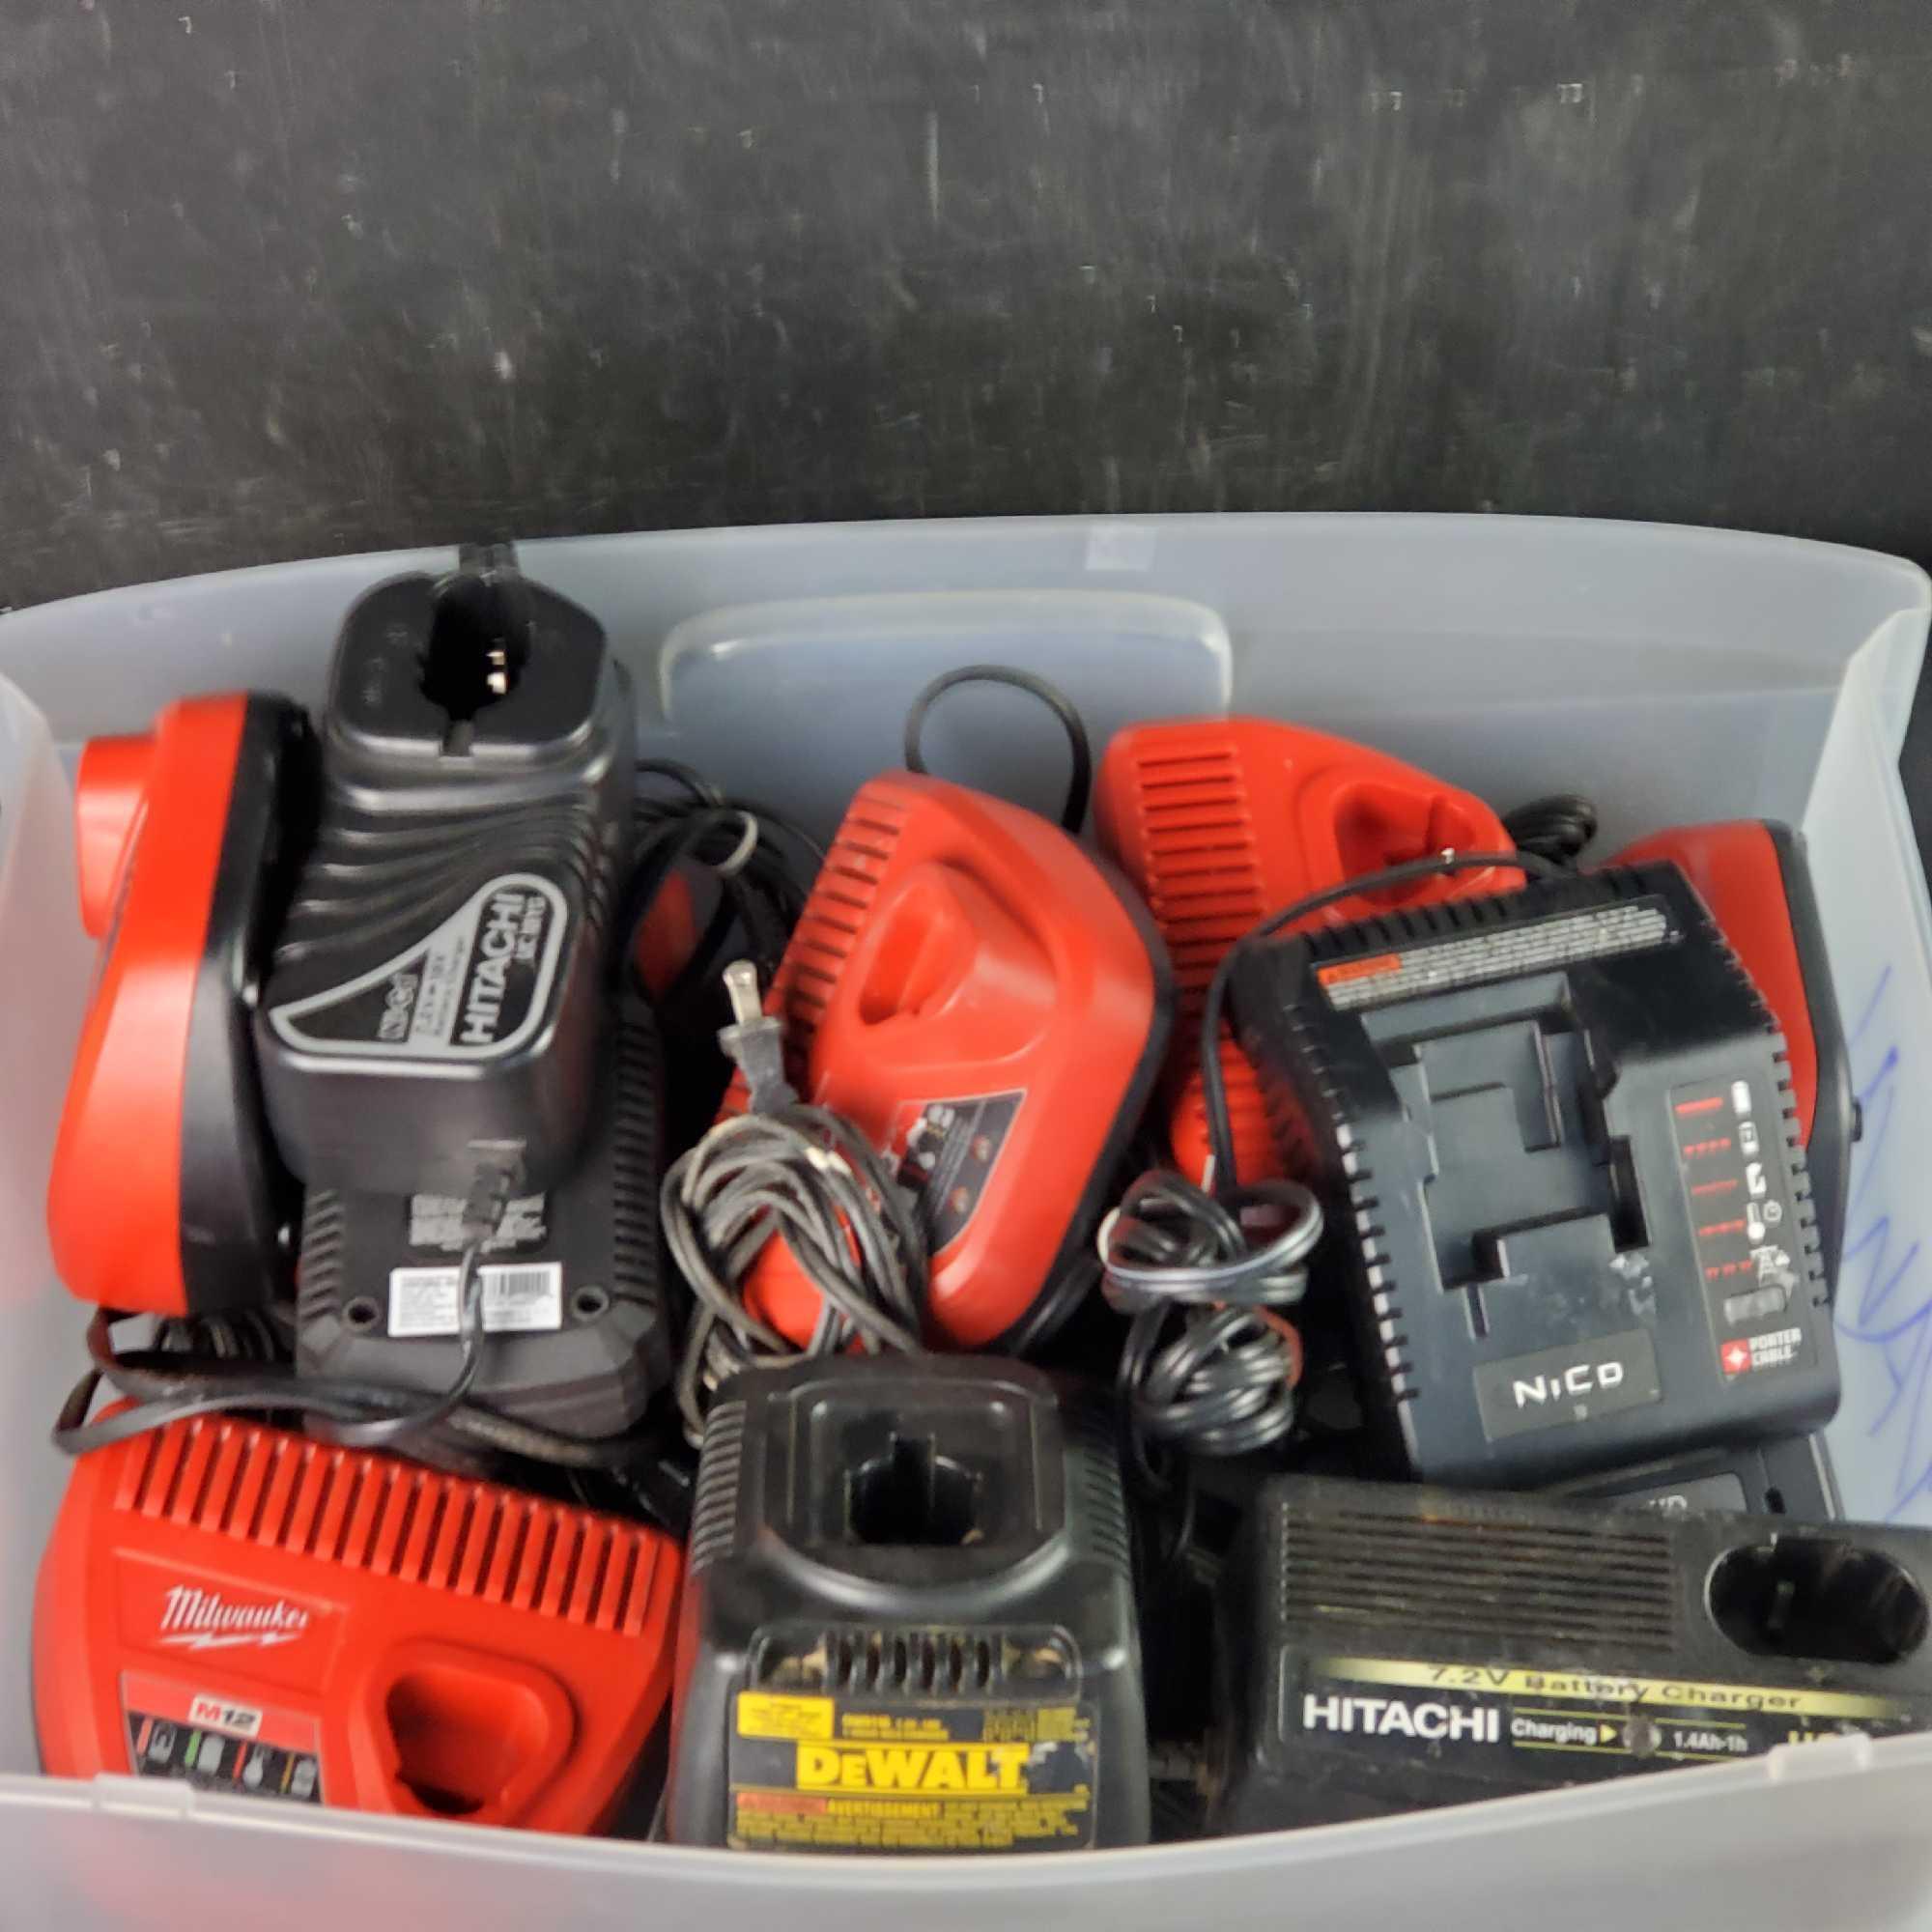 Bin of cordless battery chargers Milwaukee Makita DeWalt Porter Cable Craftsman